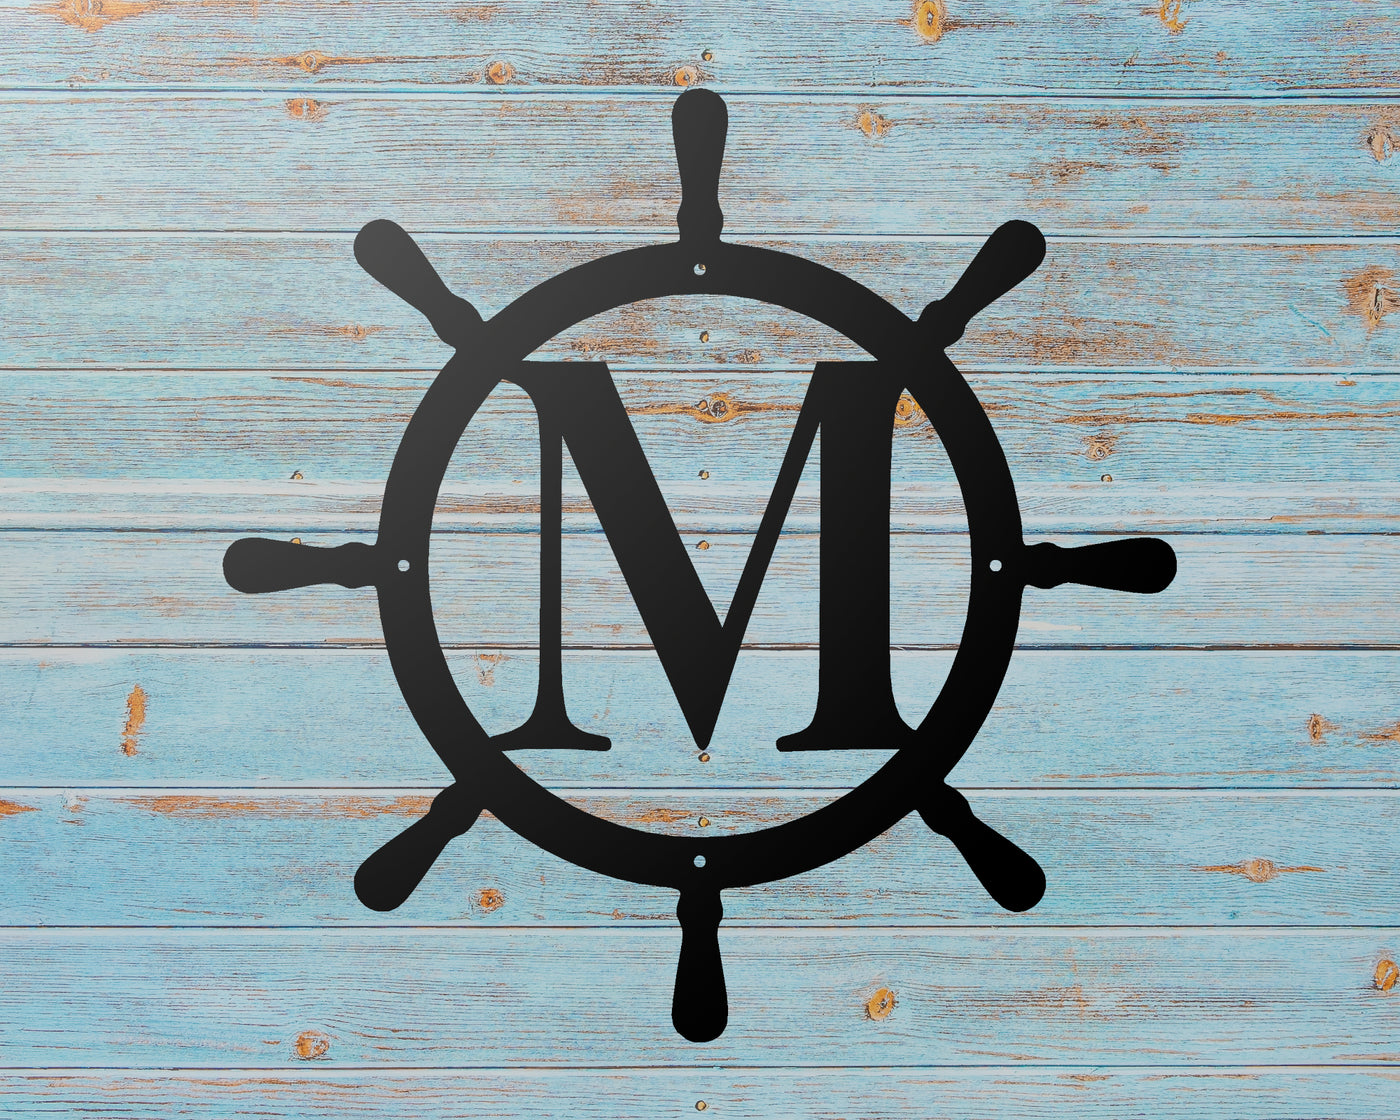 Personalized Monogram Shipwheel Metal Sign - Madison Iron and Wood - Personalized sign - metal outdoor decor - Steel deocrations - american made products - veteran owned business products - fencing decorations - fencing supplies - custom wall decorations - personalized wall signs - steel - decorative post caps - steel post caps - metal post caps - brackets - structural brackets - home improvement - easter - easter decorations - easter gift - easter yard decor